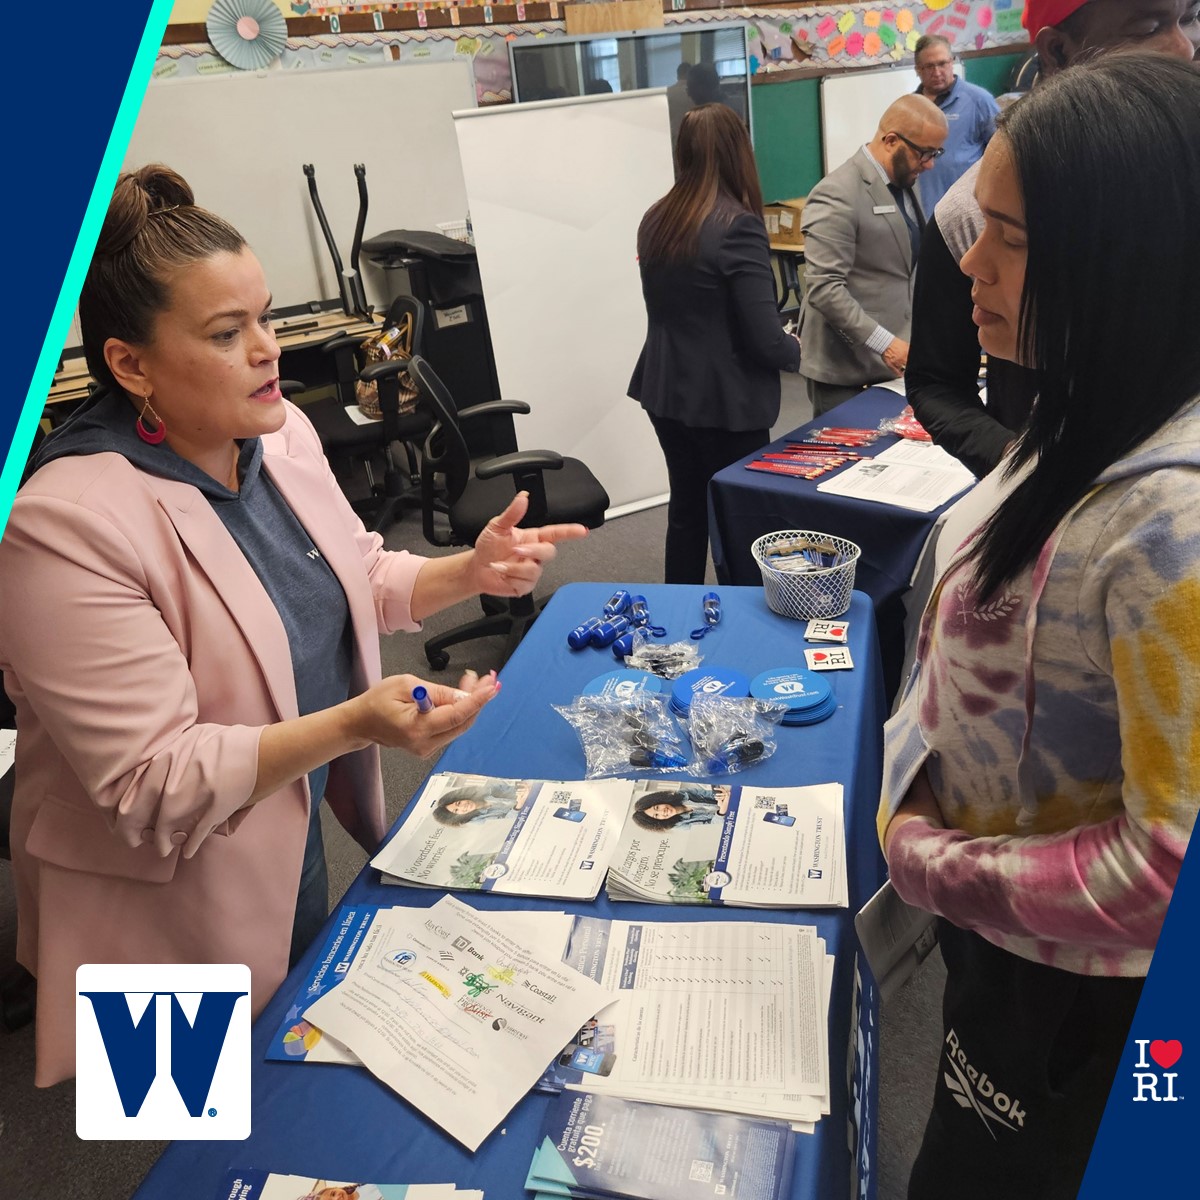 Last week, Washington Trust participated in @GenesisCenter Financial Fair wrapping up #FinancialLiteracyMonth and providing information about banking solutions including the path to homeownership! _______________ What we value is you.™ #WashTrust #FinLit #iLuvRI